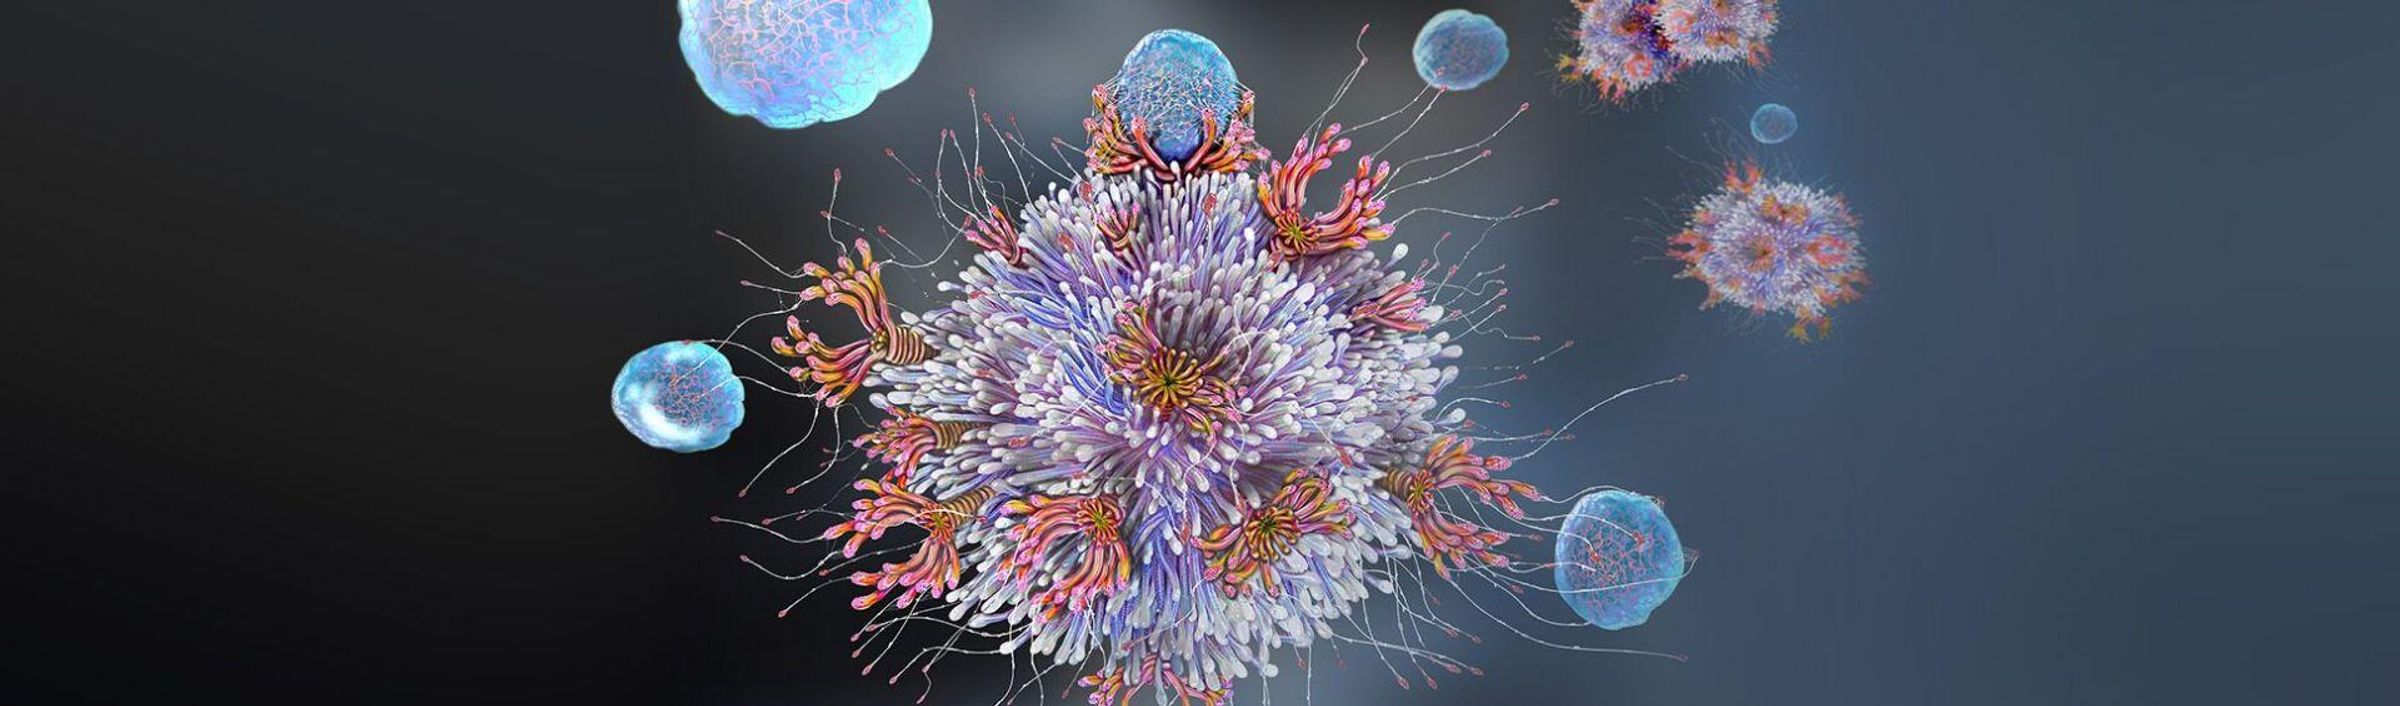 Artist's interpretation of a T cell (white blood cell) binding to an antigen. [Illustration: Getty Images]